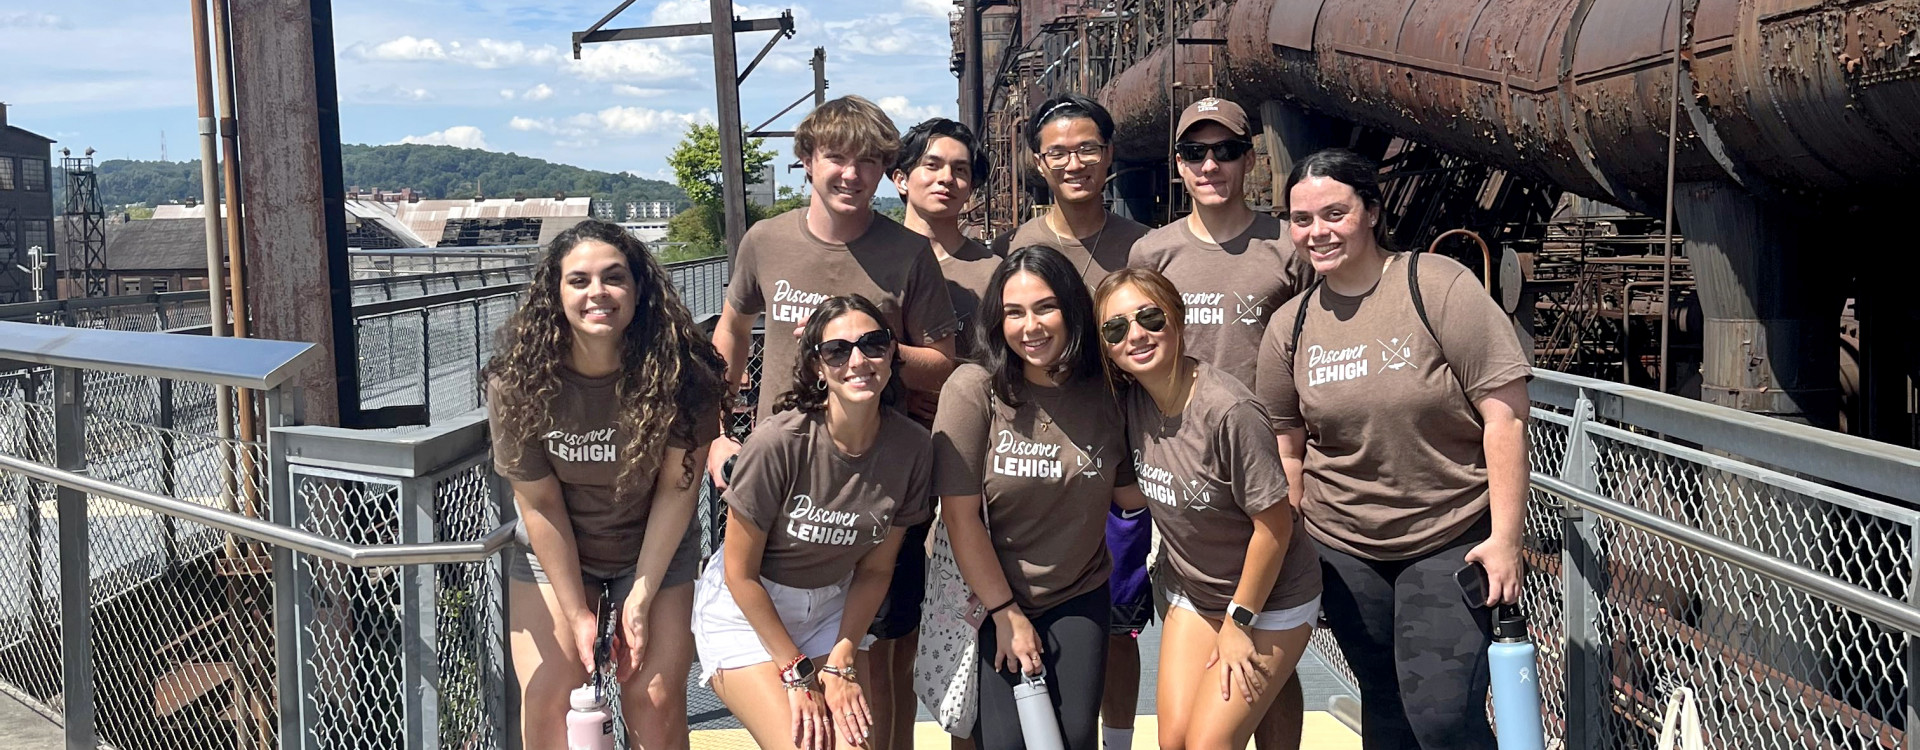 Discover Lehigh participants at the Steel Stacks